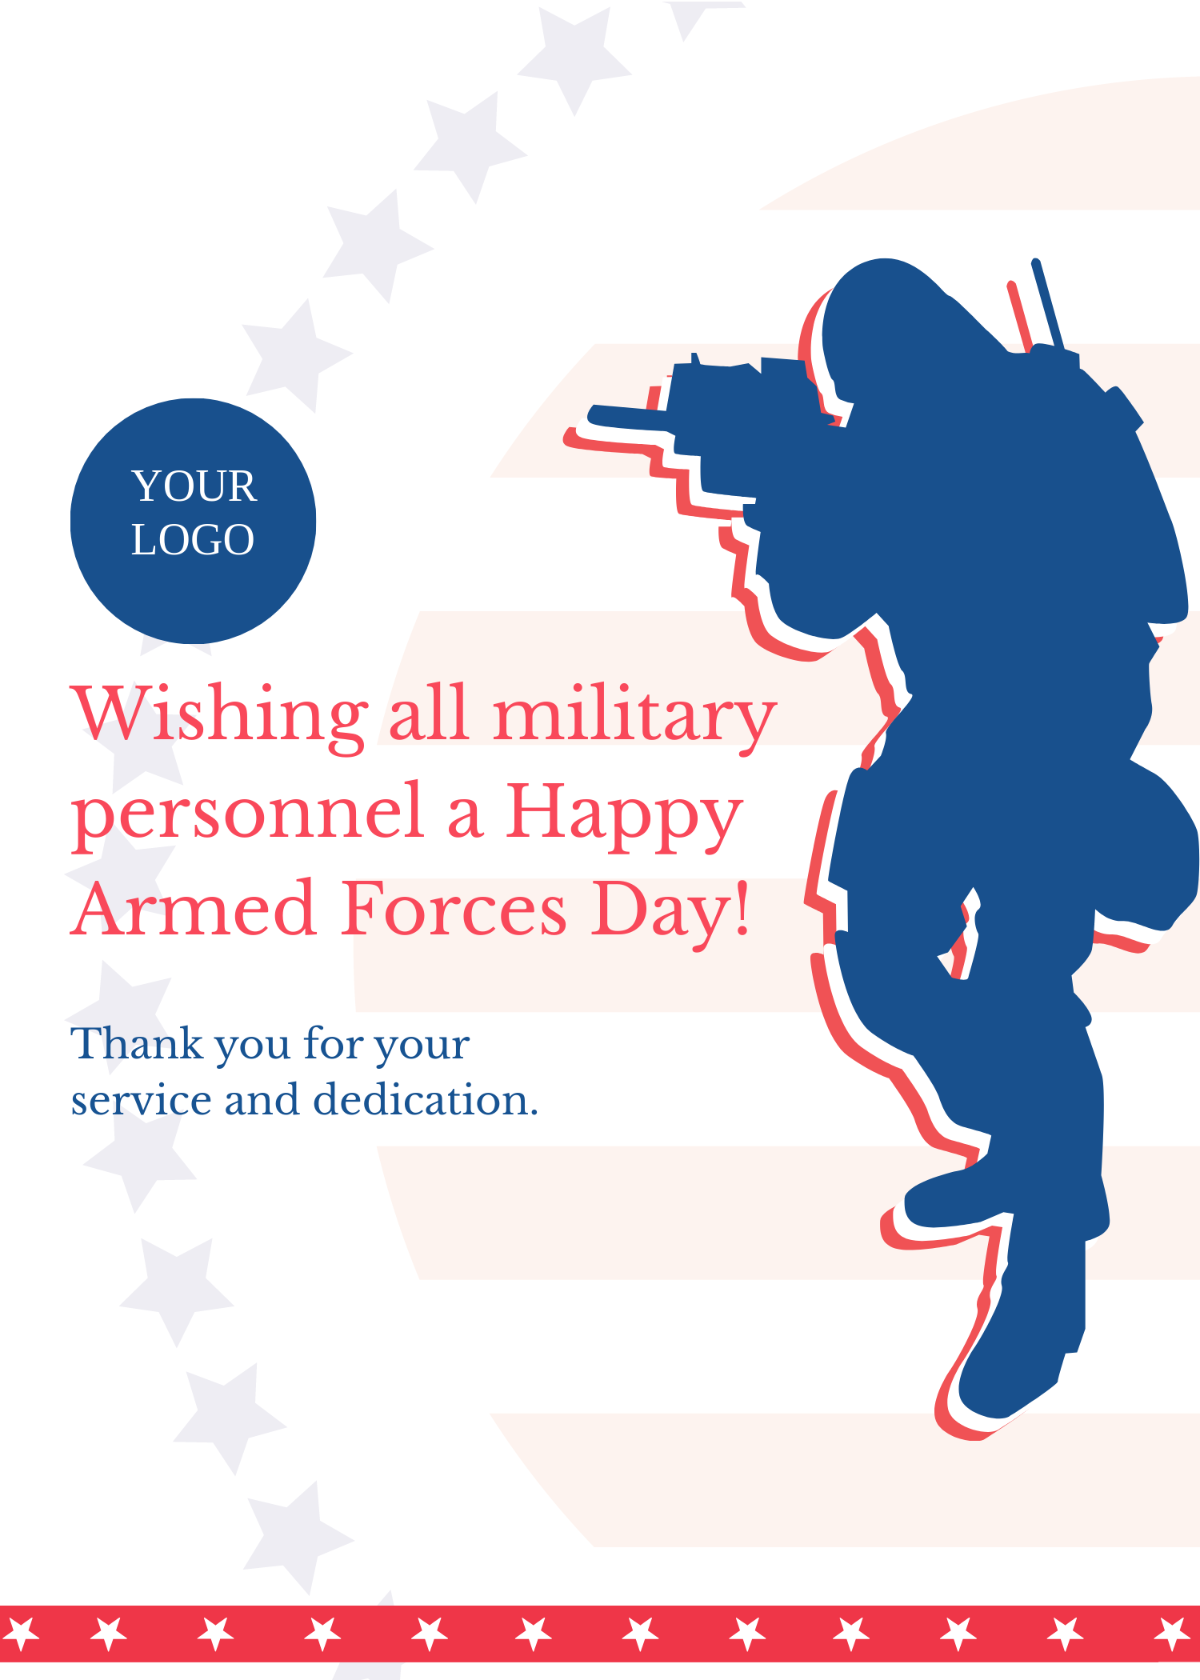 Armed Forces Day Wishes Template